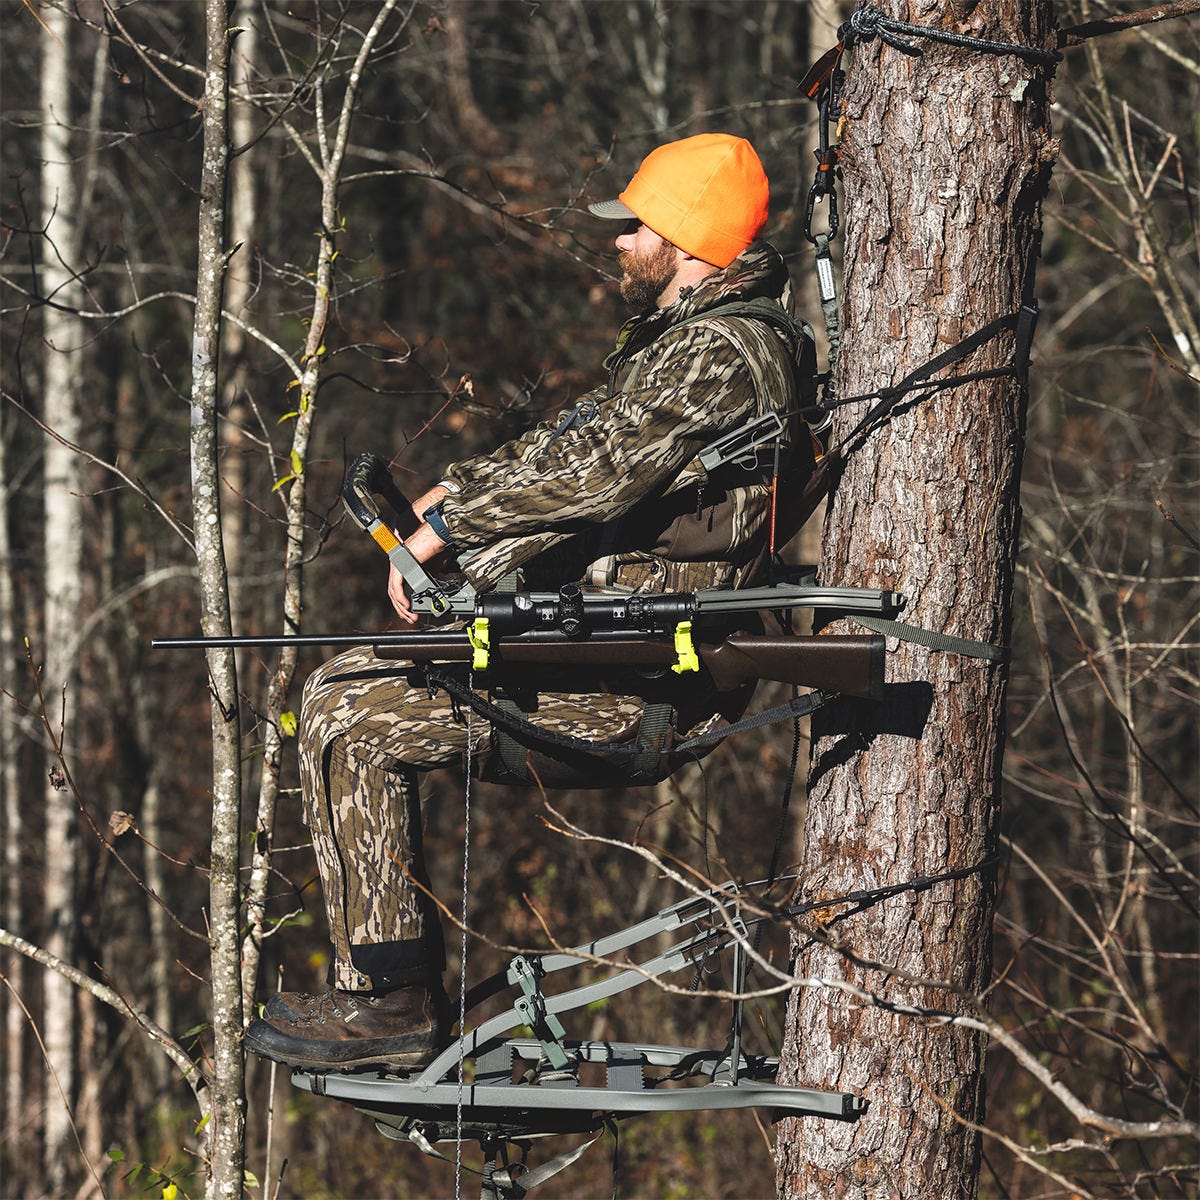 Man sitting in the Summit Dual Threat PRO SD climbing treestand in the Rifle Hunting position